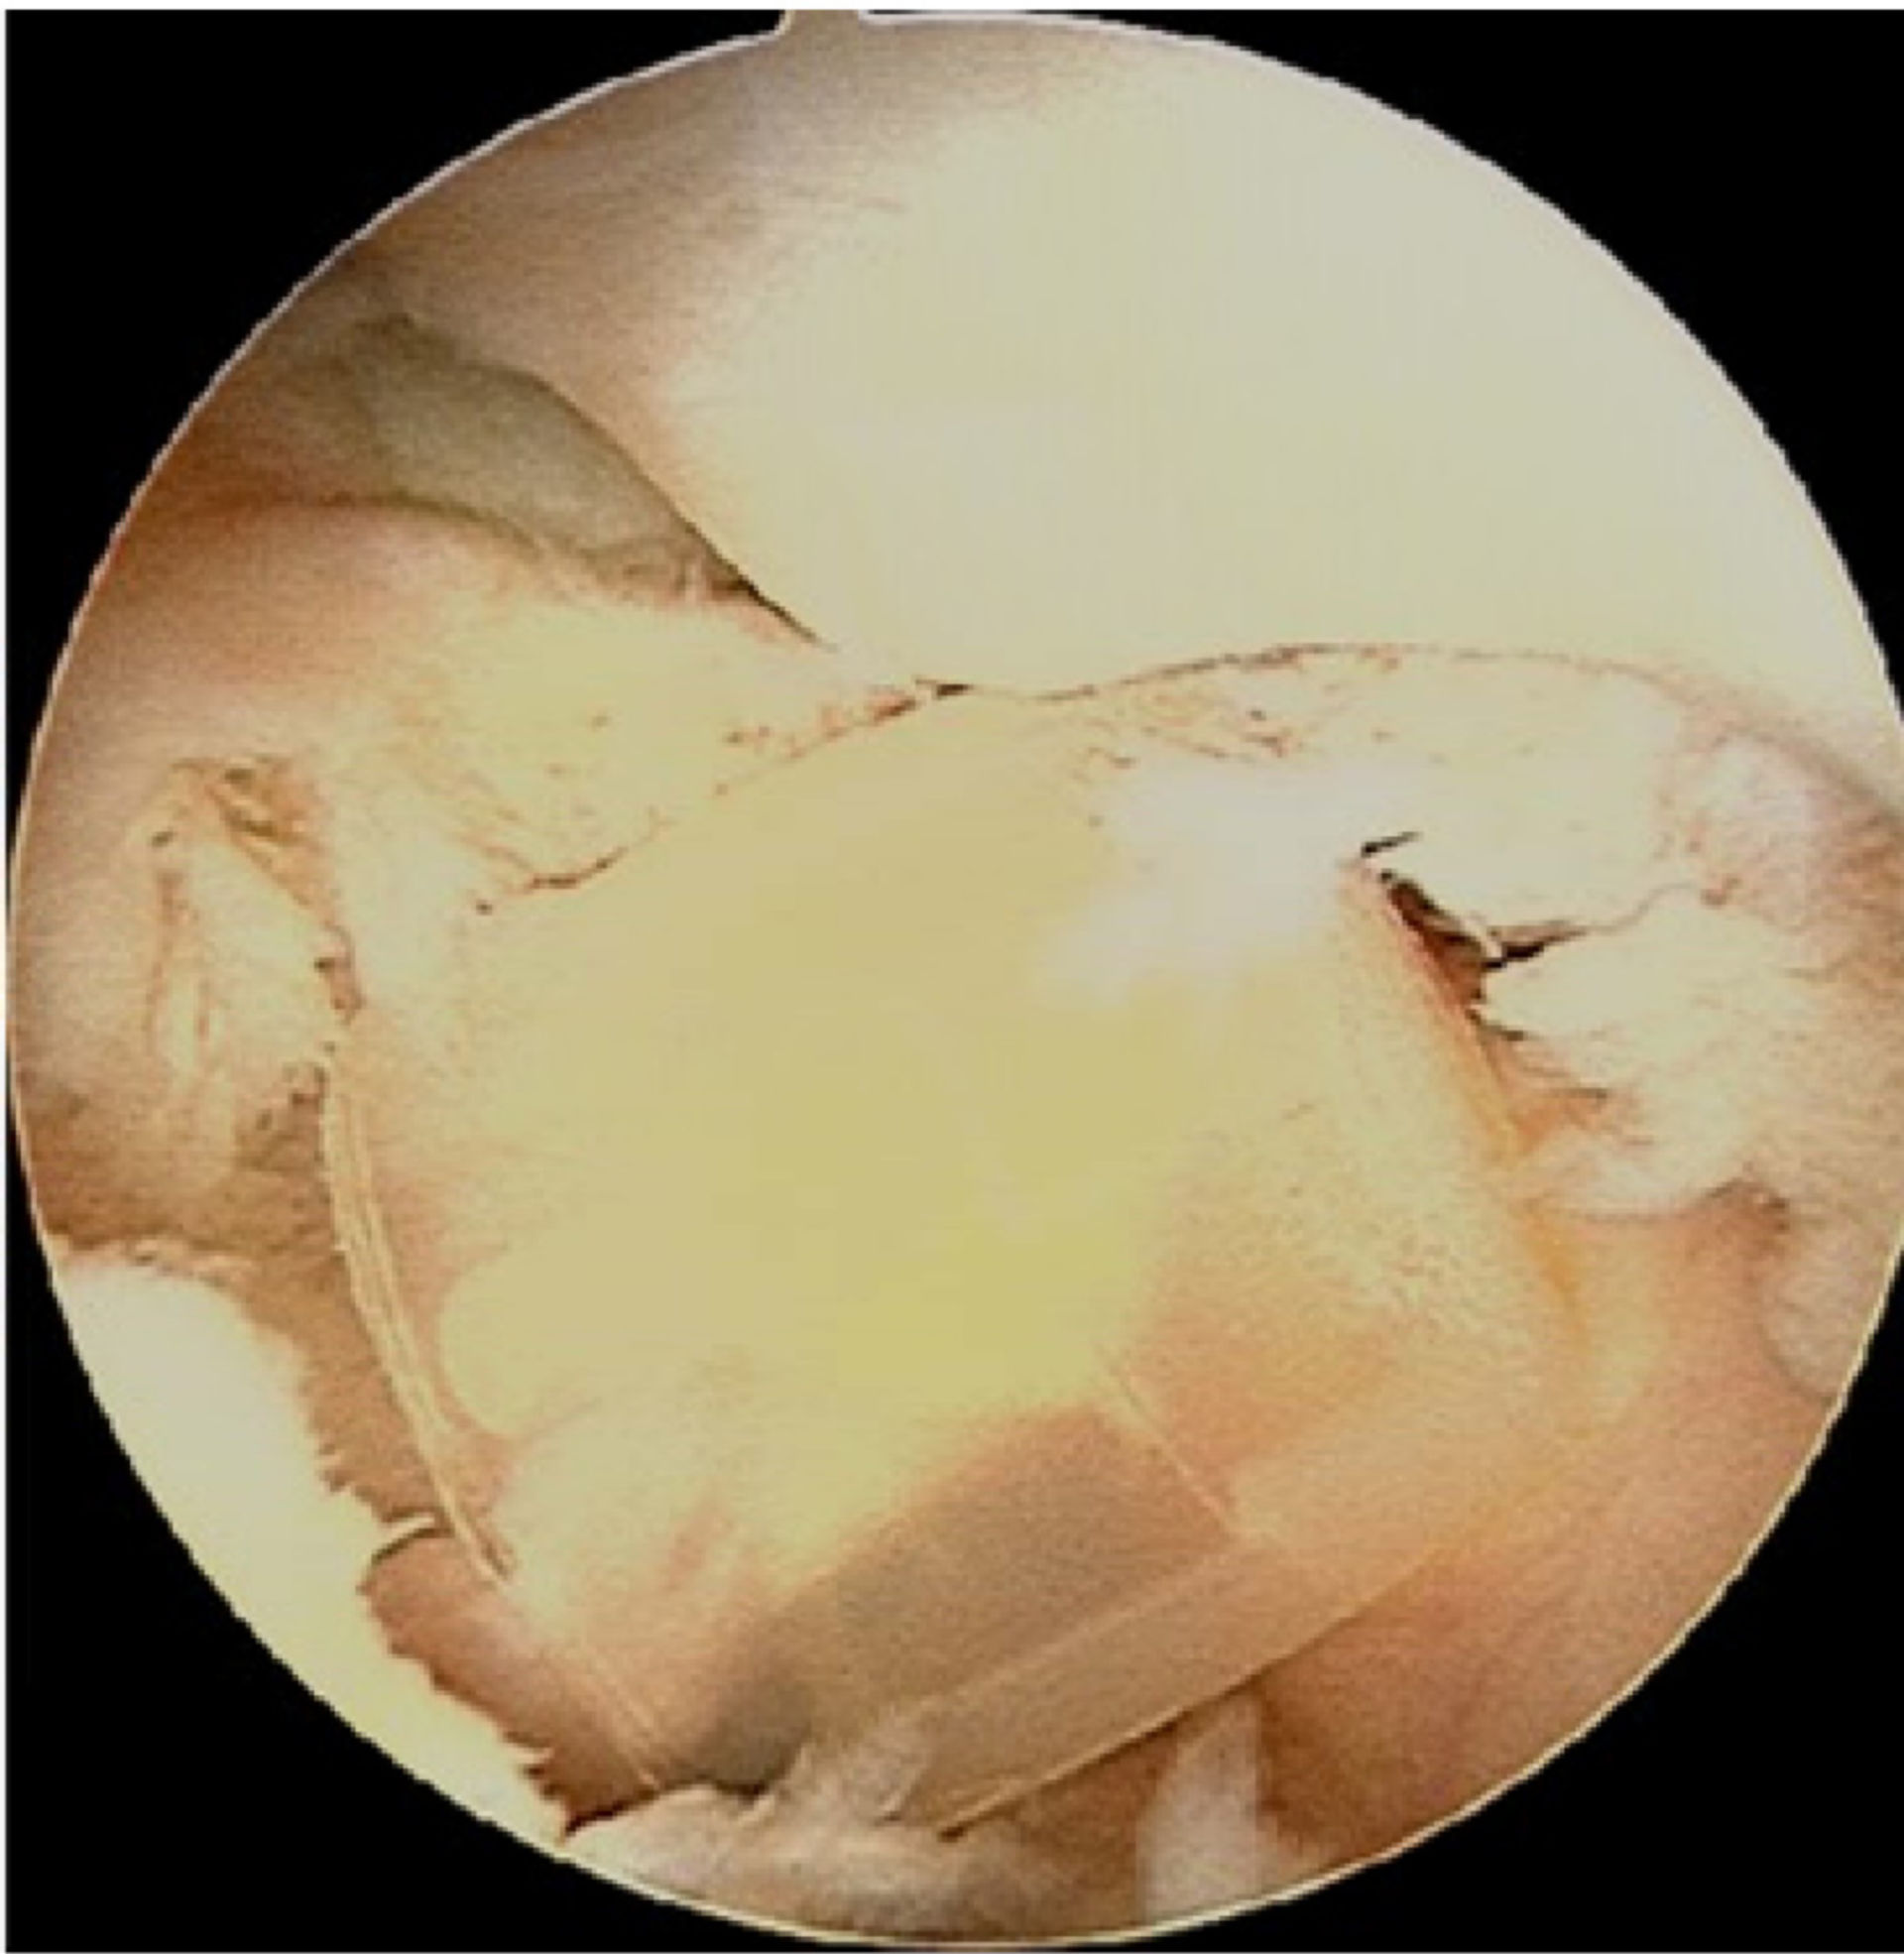 Soft drink bottle cap within the femoral intercondylar notch, anterior to the ACL.